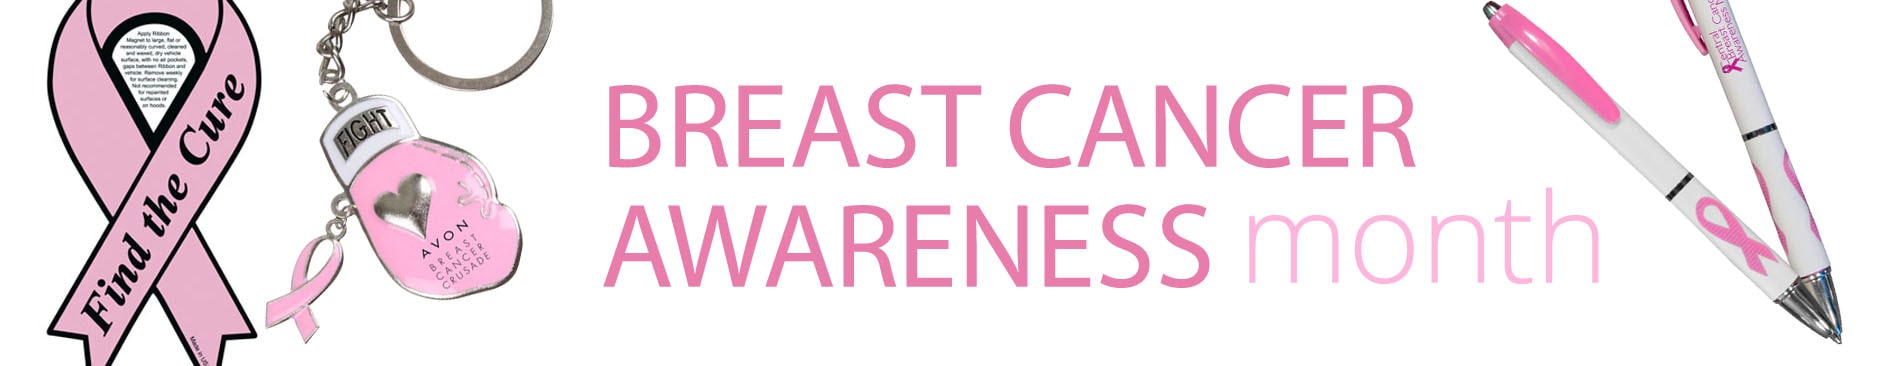 Breast Cancer Awareness Promotional Items